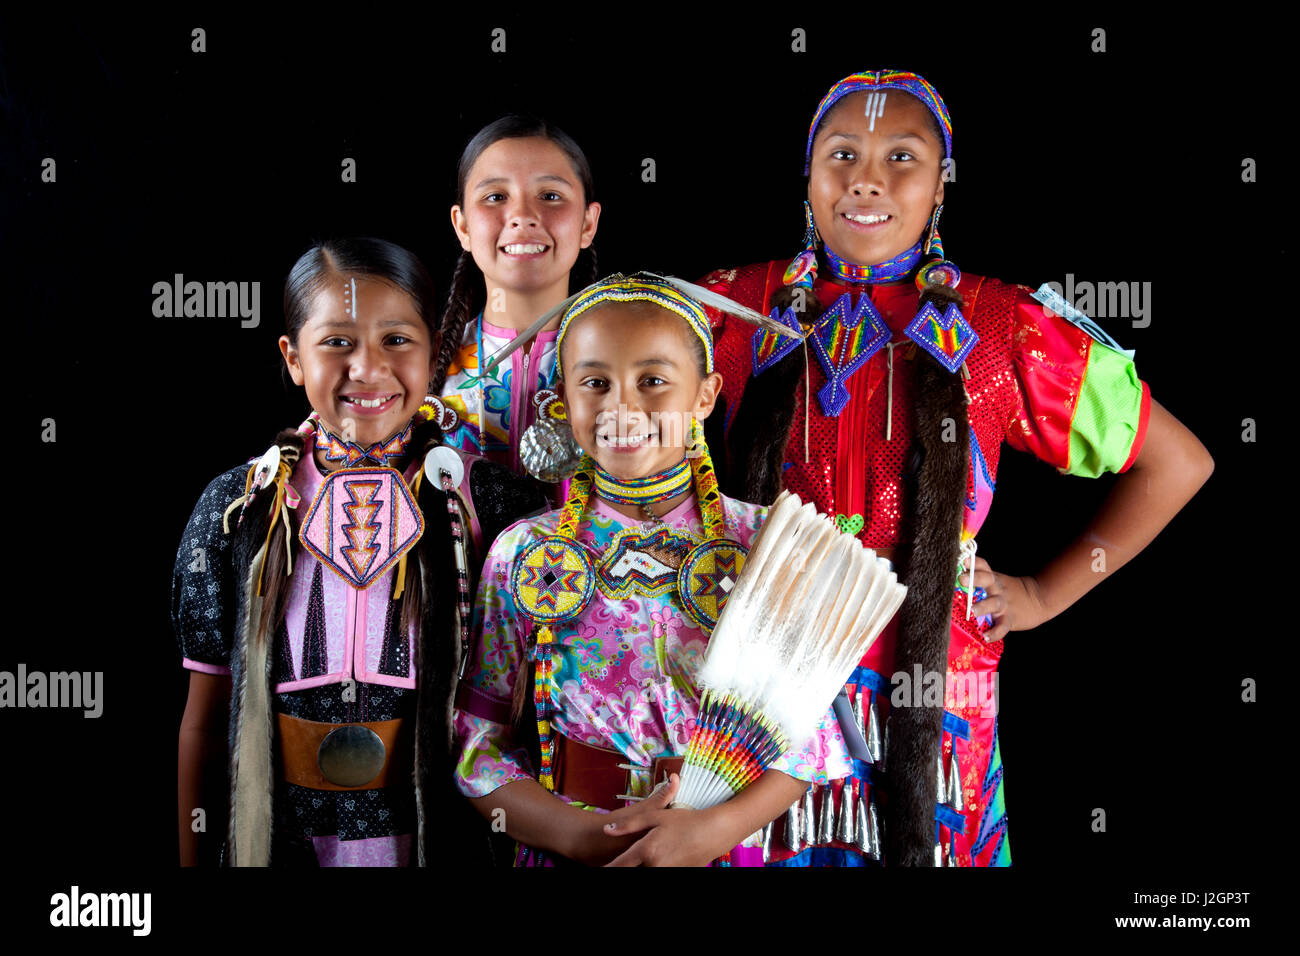 Pow wow friends Aarora Piper, Jaydean, Bailee and Shandiin Horton all dressed in dance regalia pose as a group against a black background Stock Photo